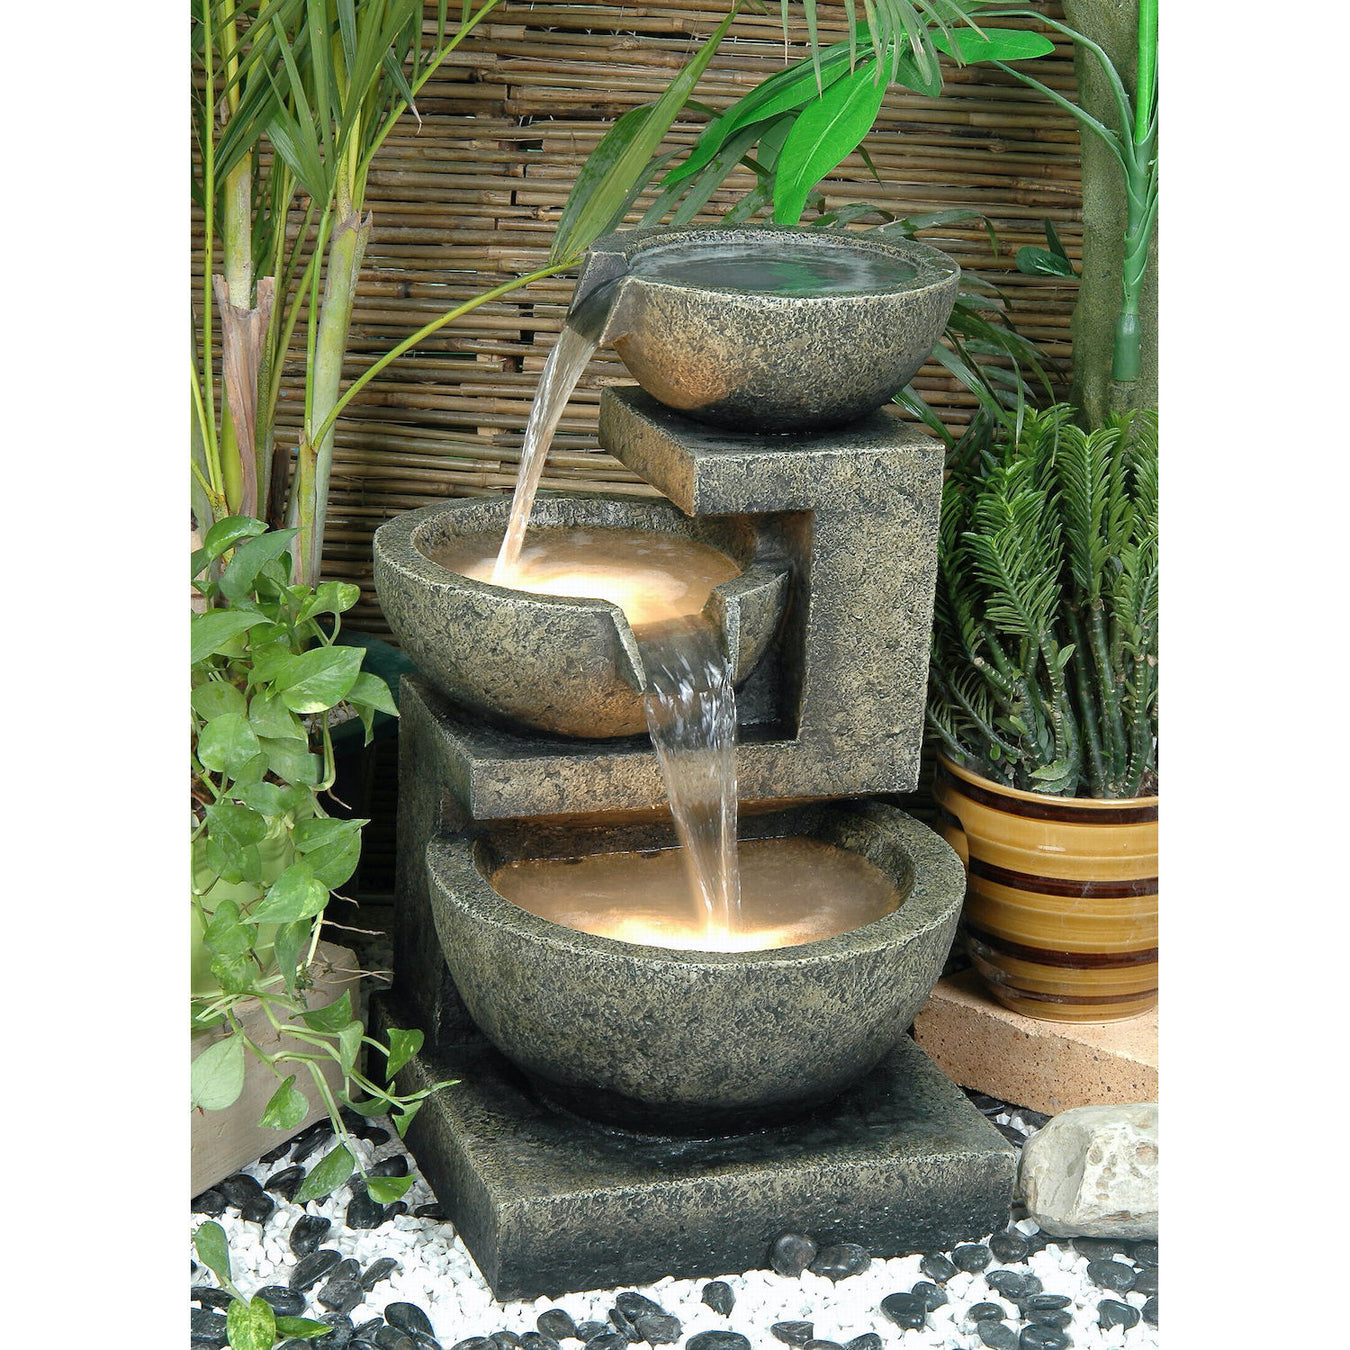 All Fountains & Ornaments by Lux Garden